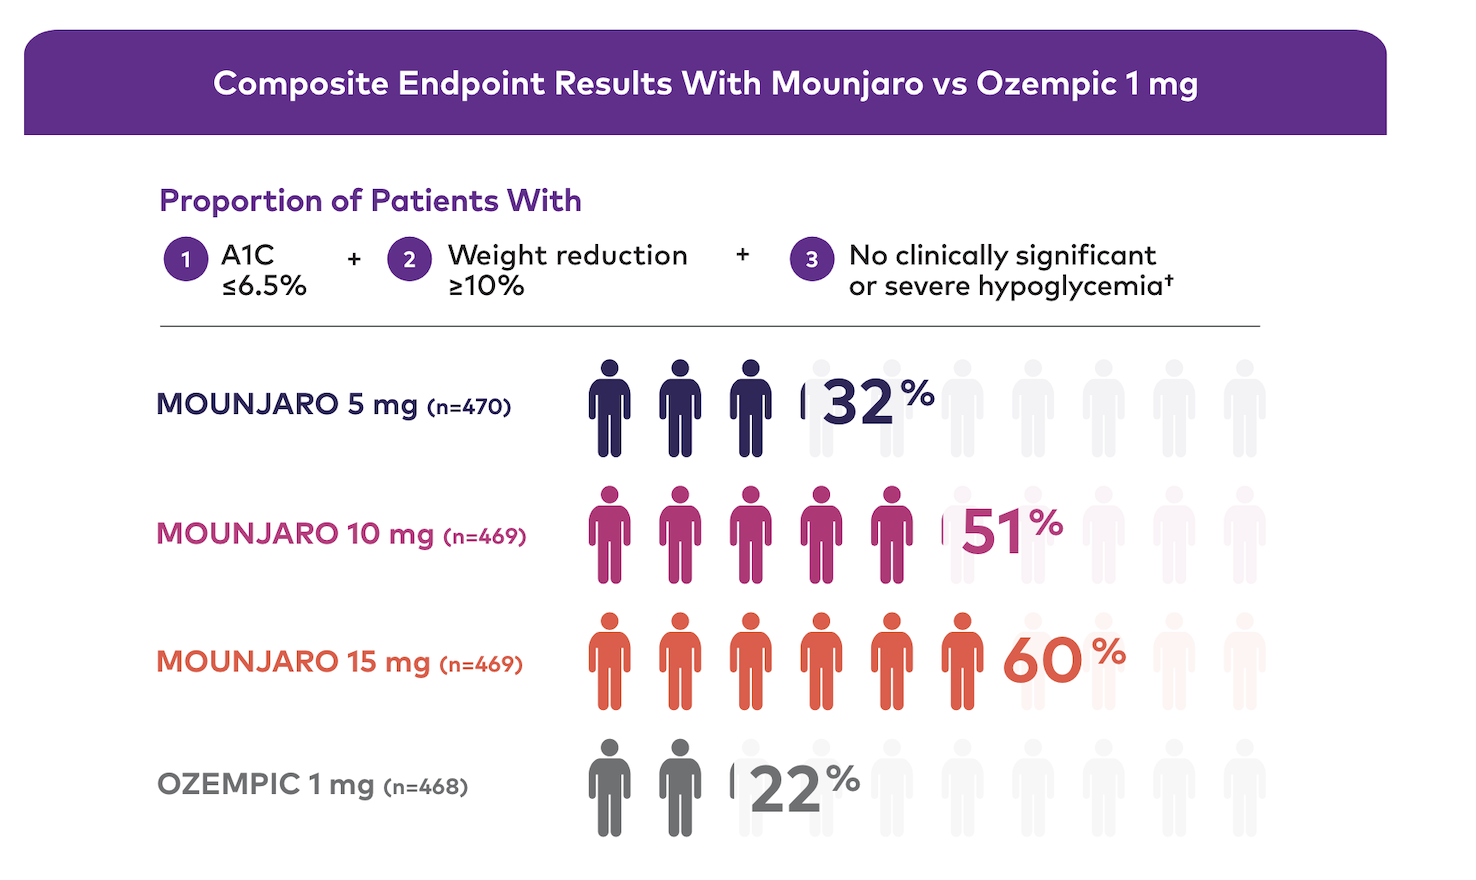 Composite endpoint results of <6.5% or less